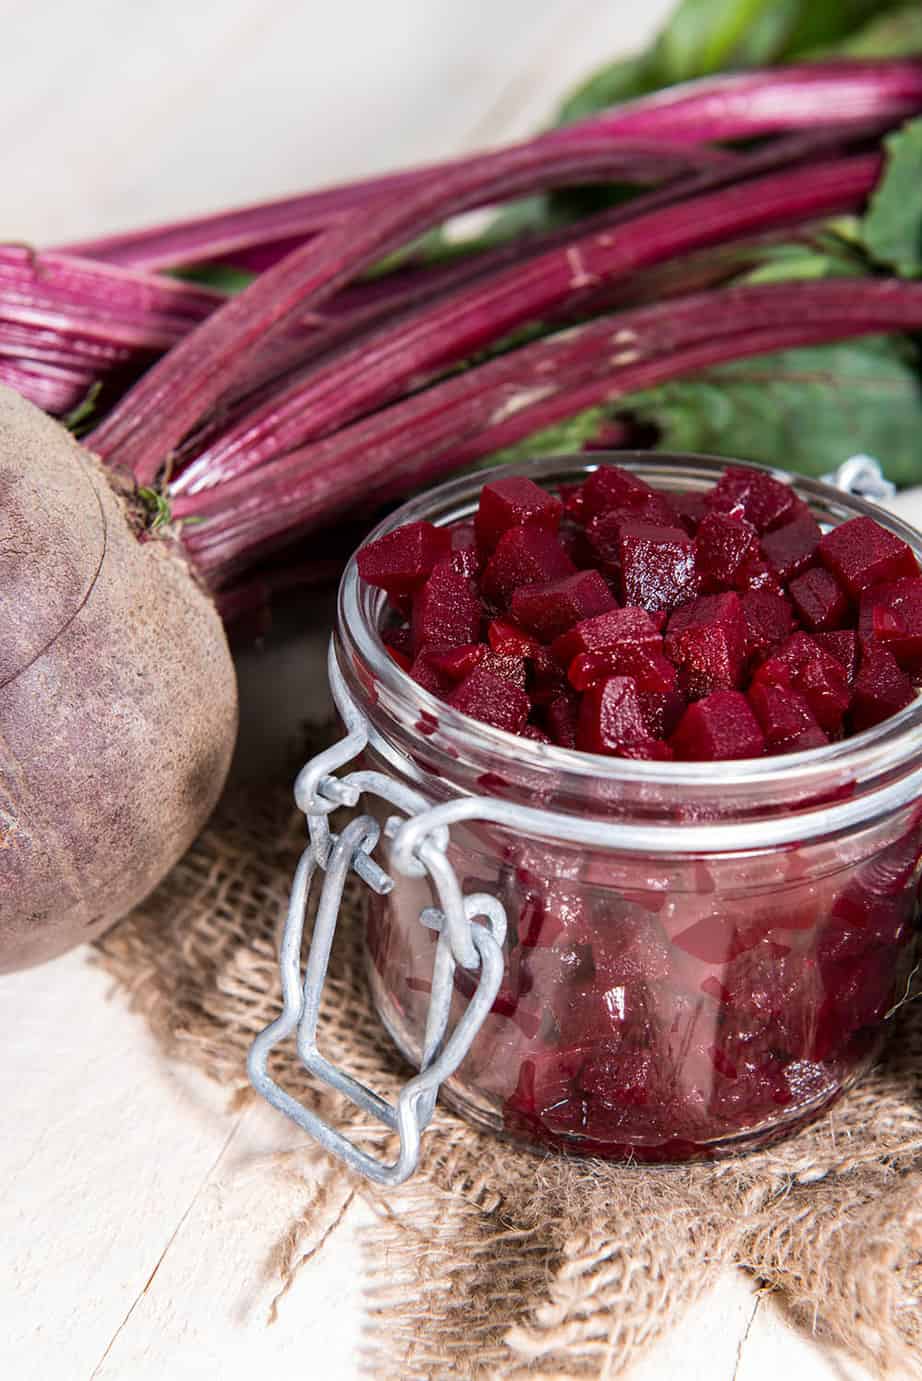 Pickled Beetroot Recipe Thermomix & Conventional